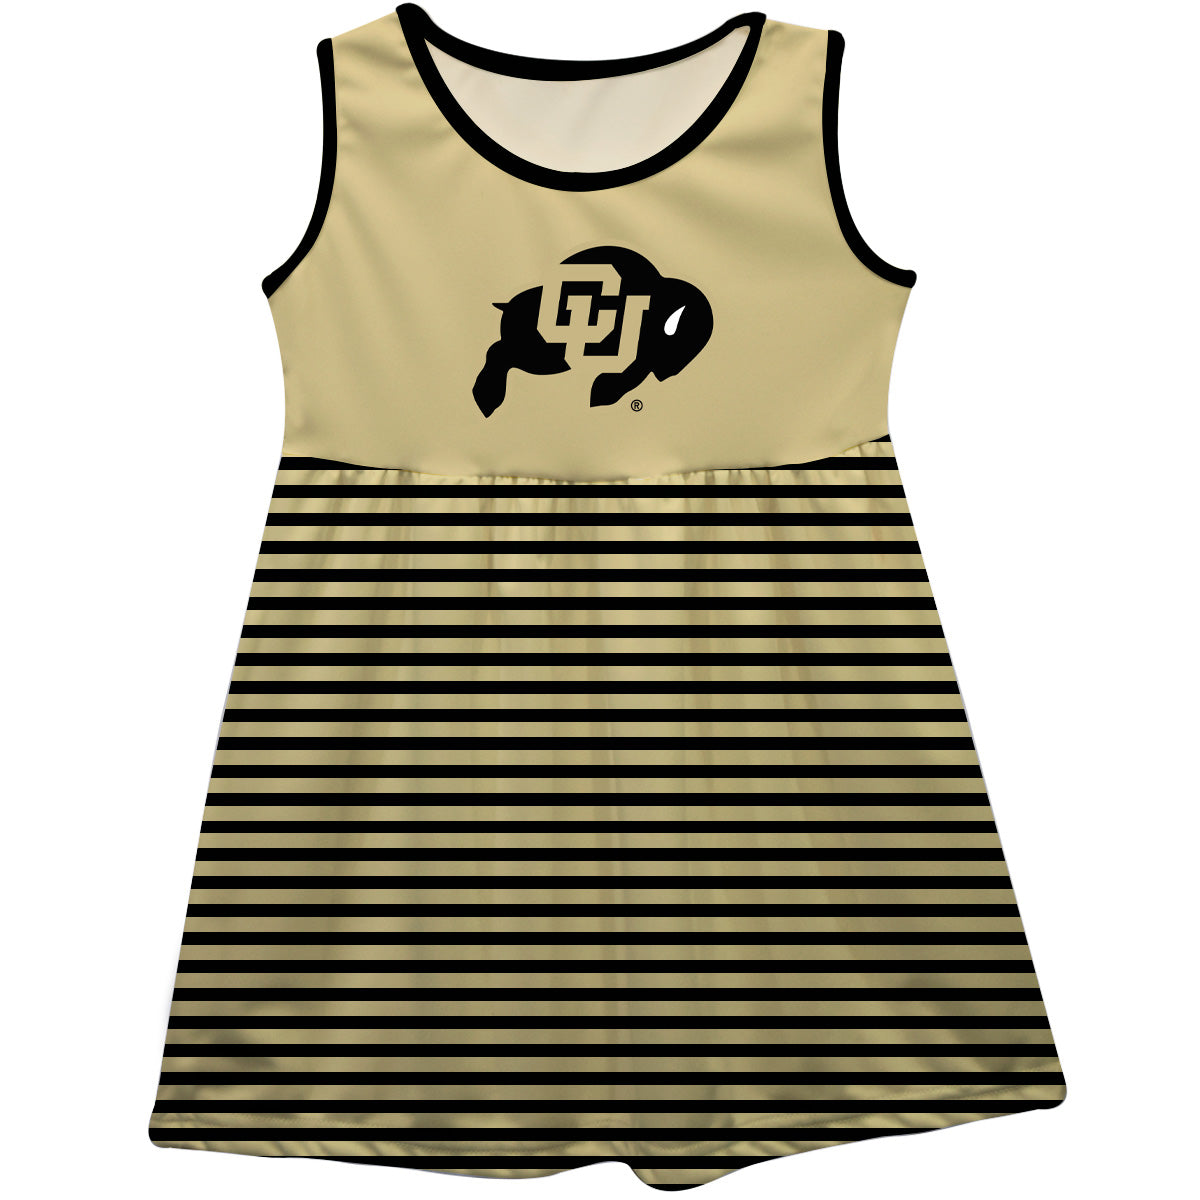 Colorado Buffaloes CU Girls Game Day Sleeveless Tank Dress Solid Gold Logo Stripes on Skirt by Vive La Fete-Campus-Wardrobe